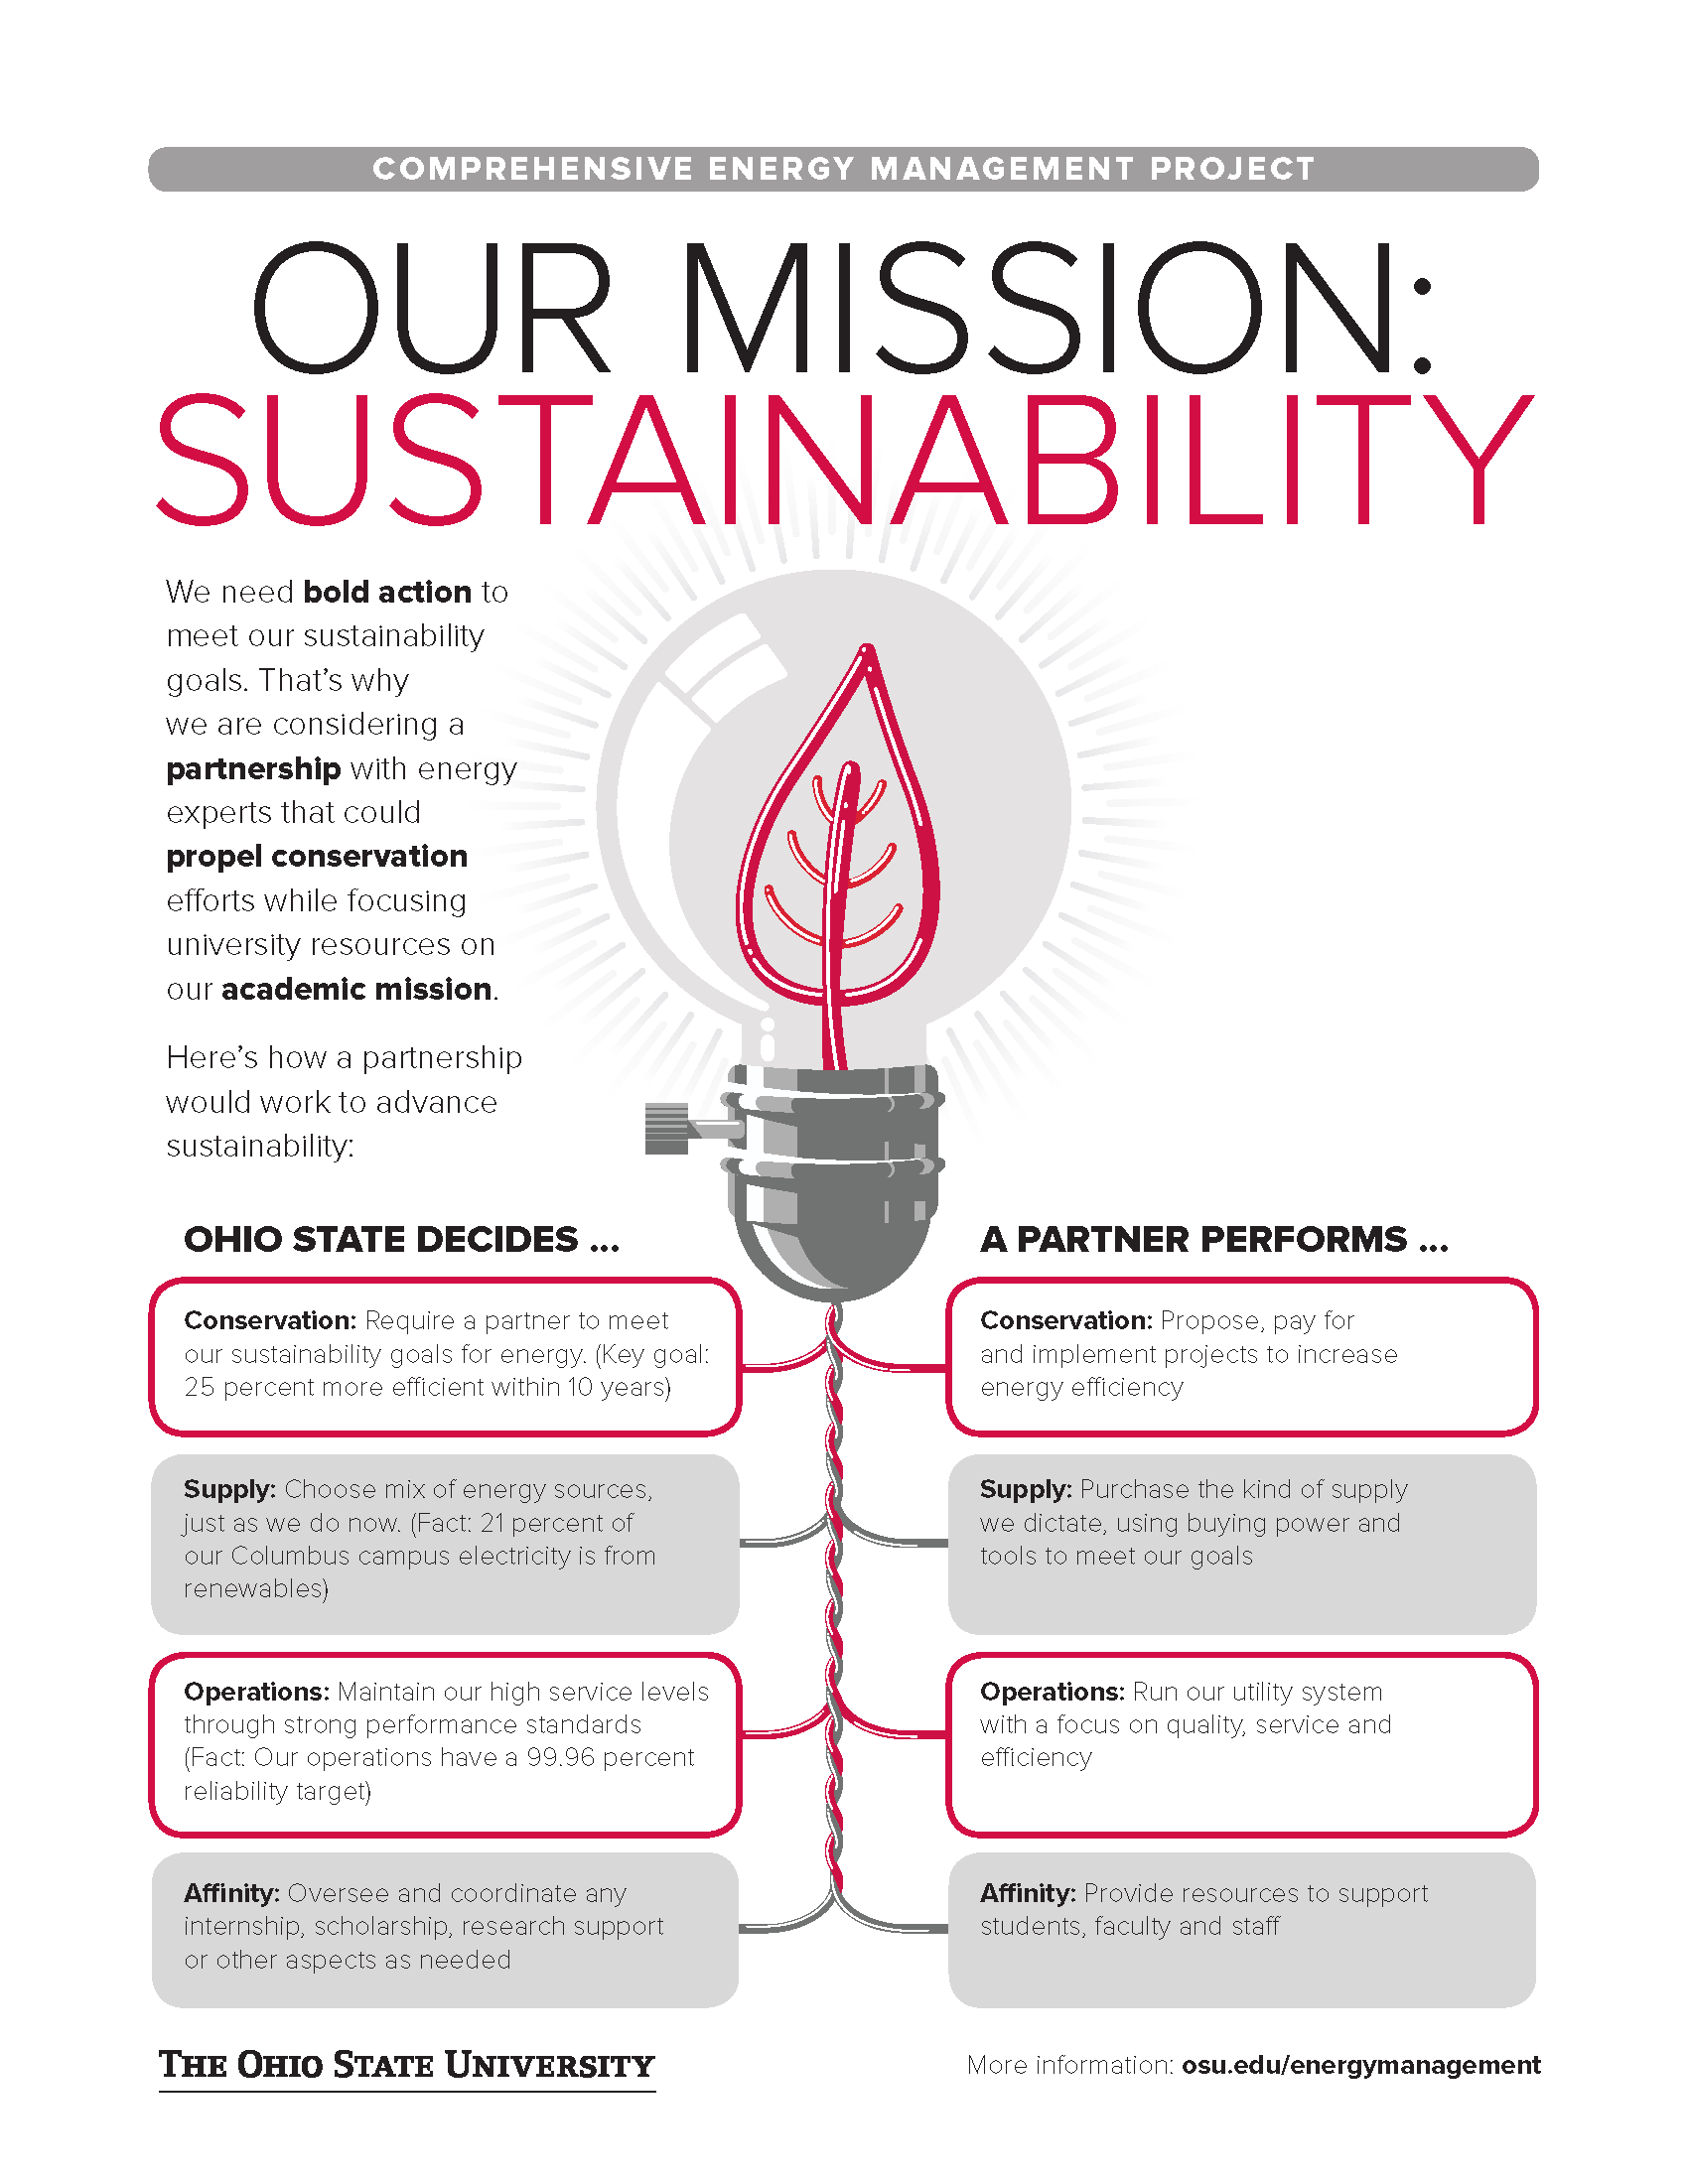 Our Sustainability Mission